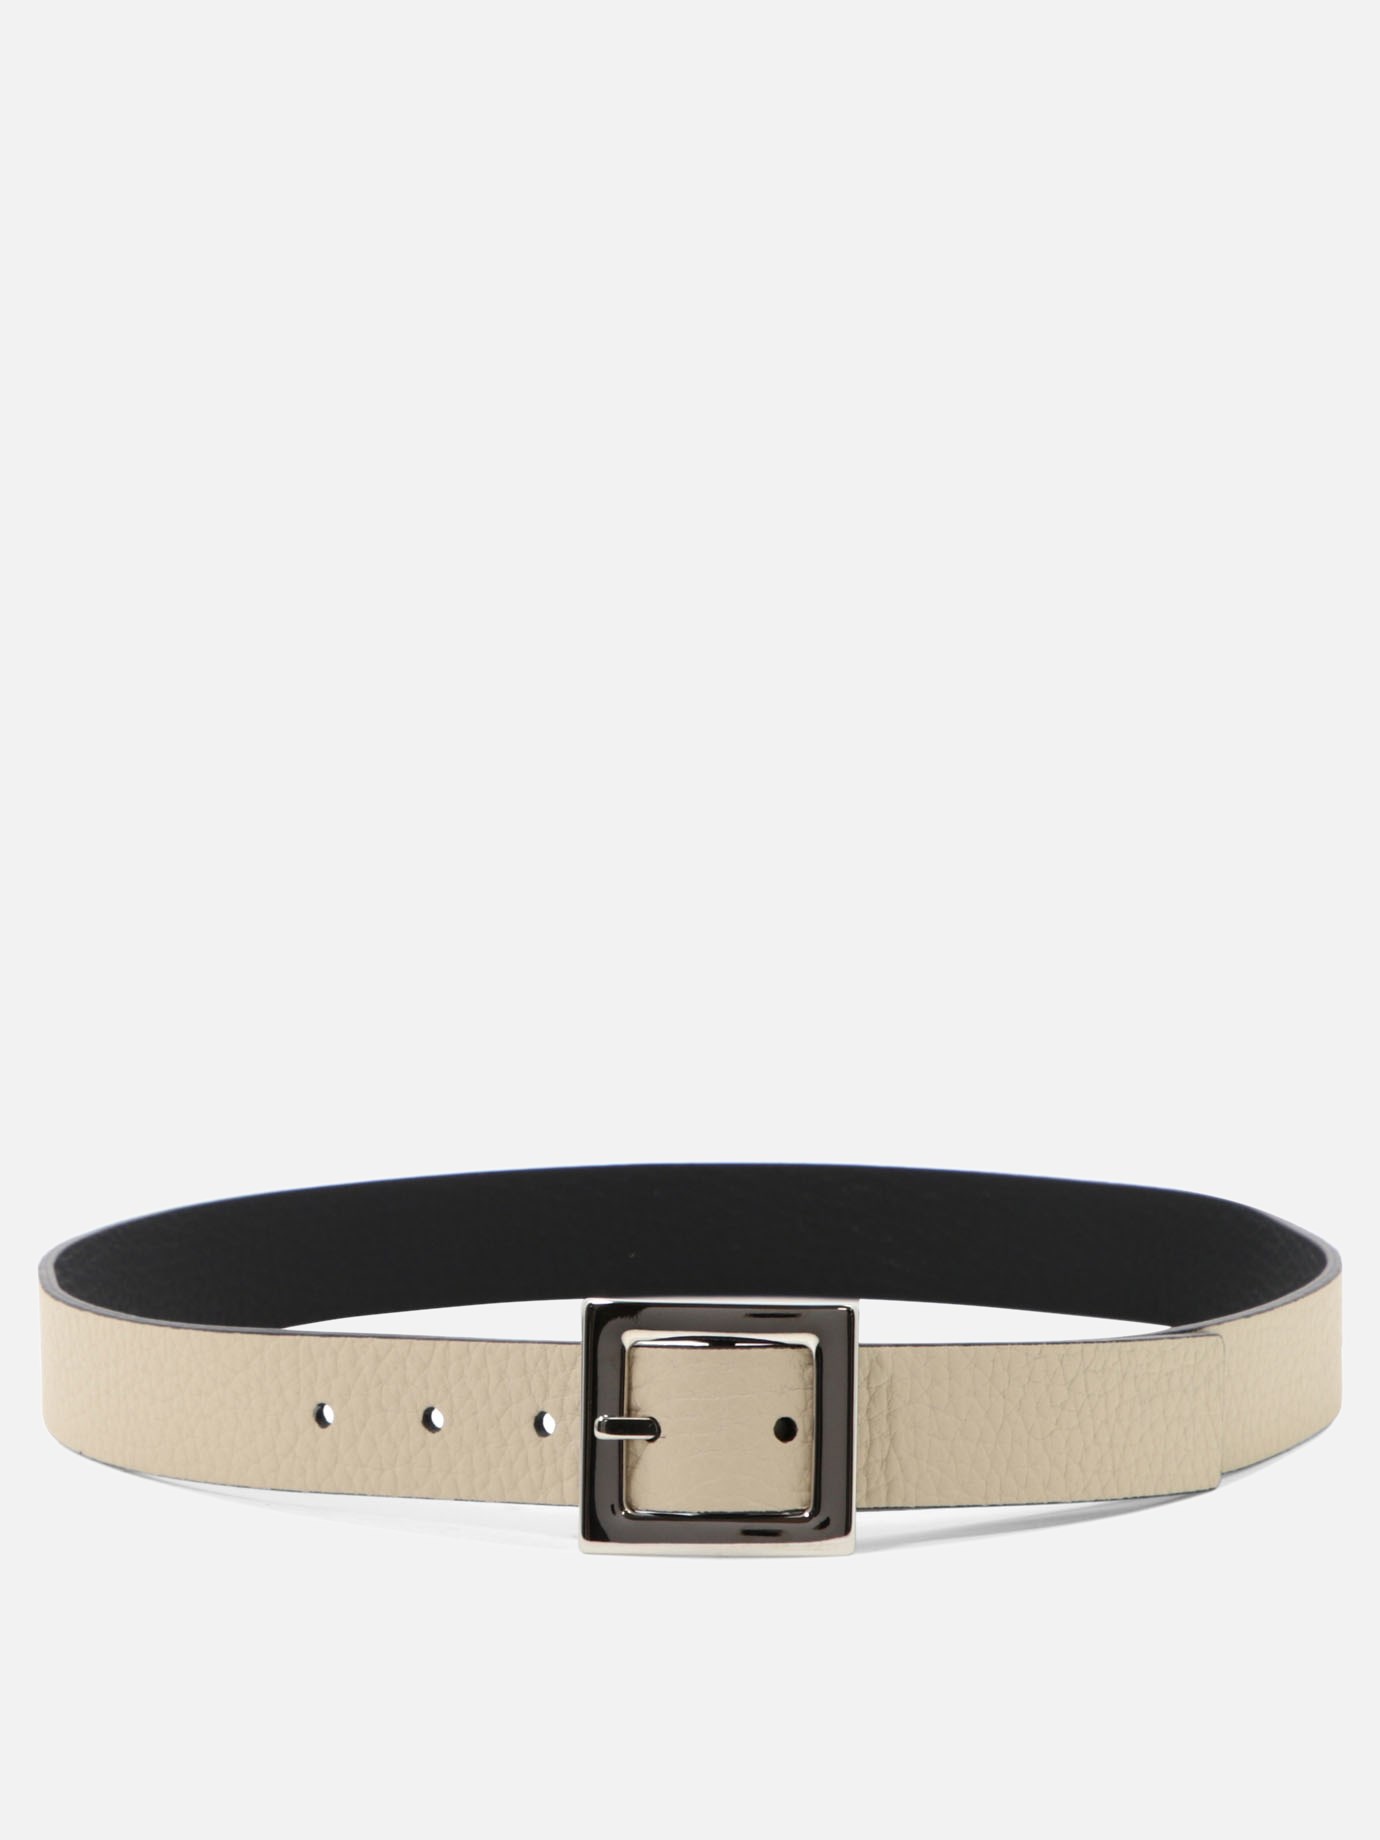  Liberty Double  beltby Orciani - 2